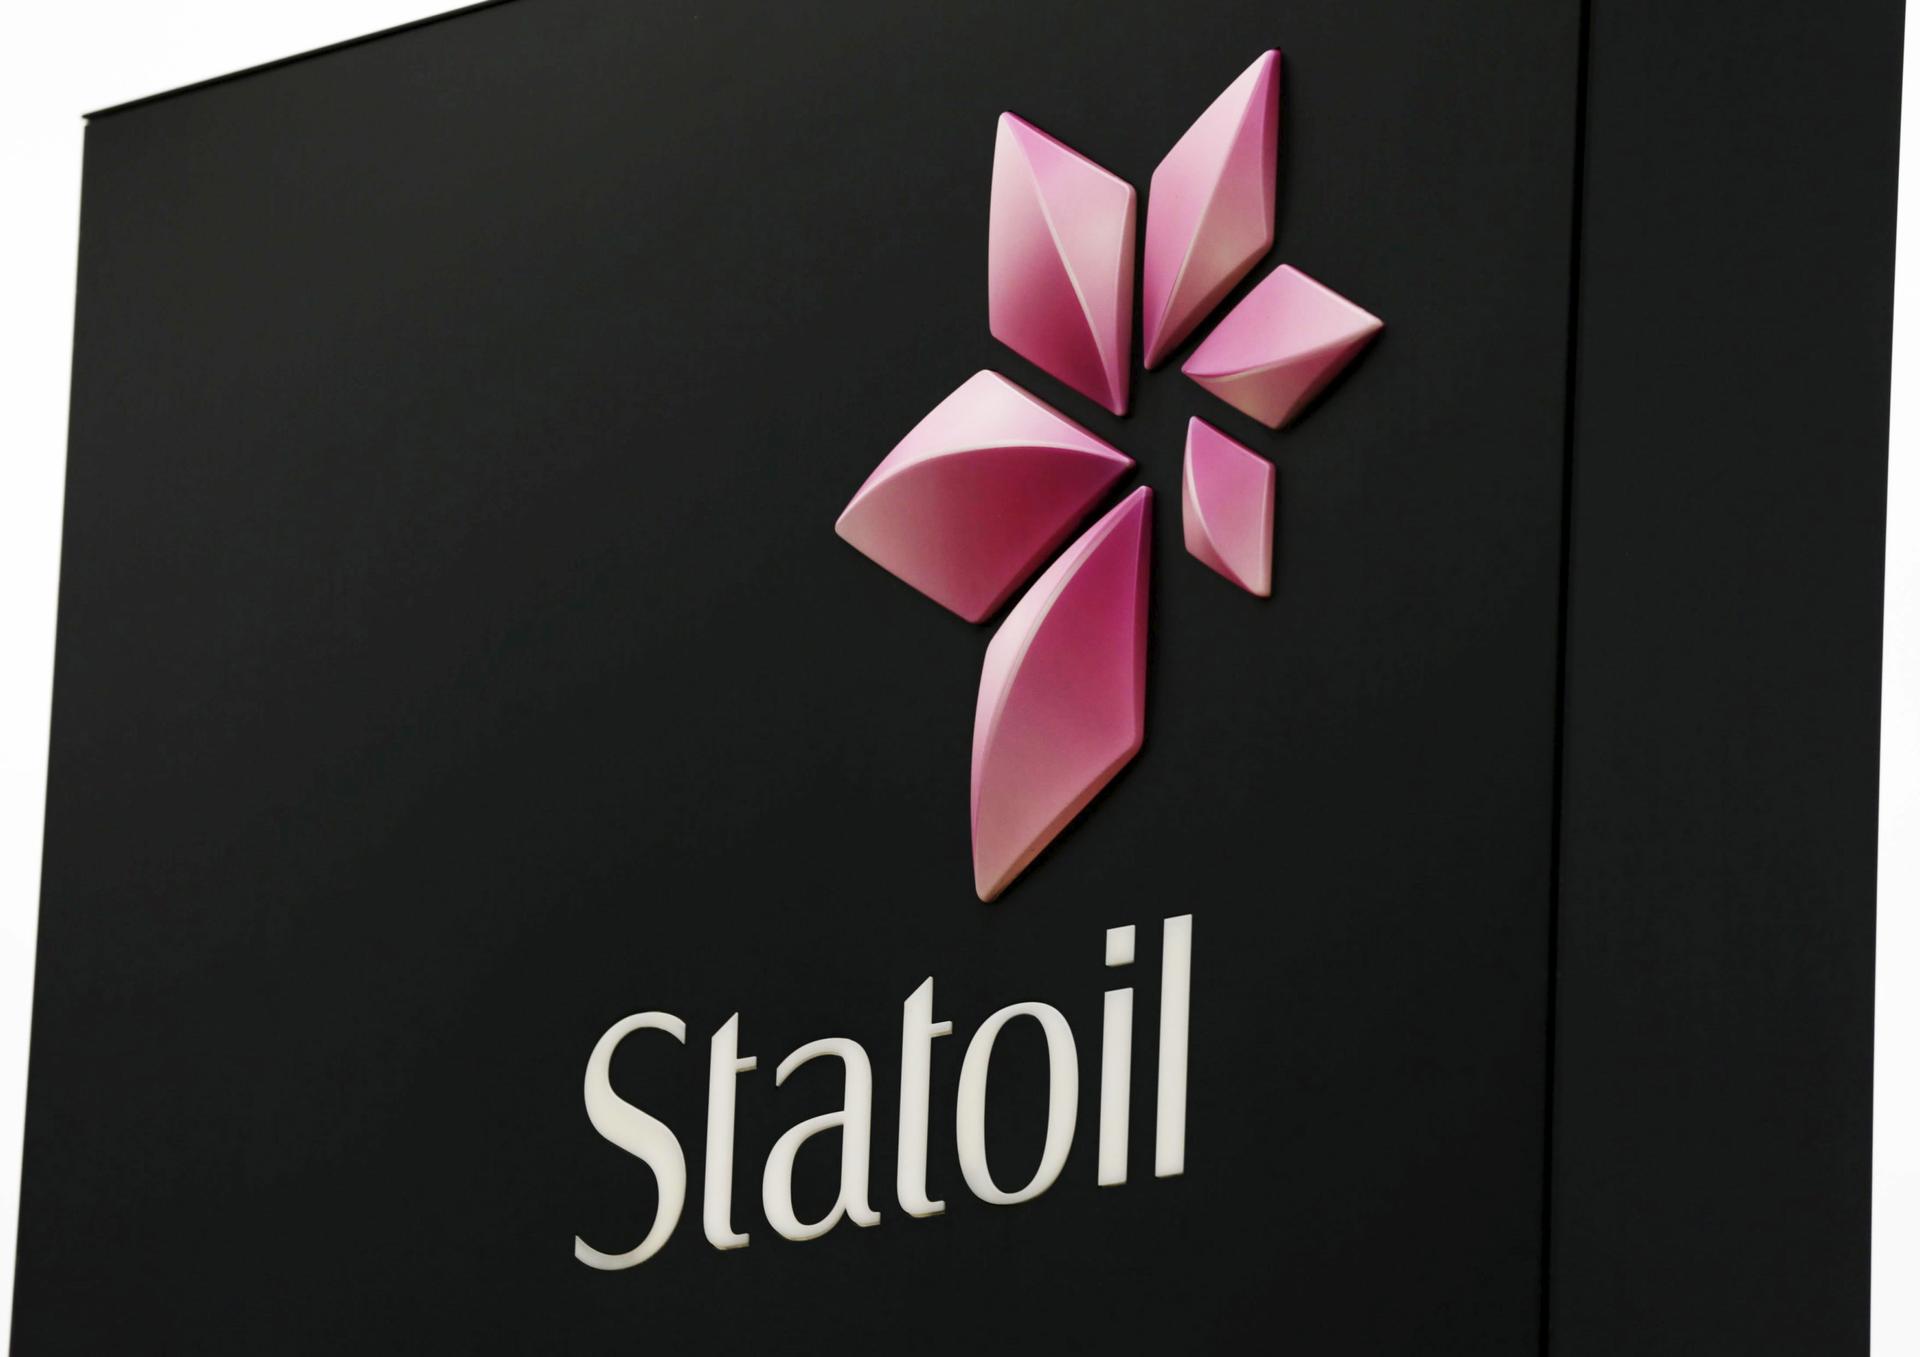 Norway's energy firm Statoil will cut up to 7 percent of its workforce and a third of its consultants by the end of 2016, State-controlled Statoil plans to cut between 1,100 and 1,500 permanent jobs, adding to cuts of 1,340 since the end of 2013.